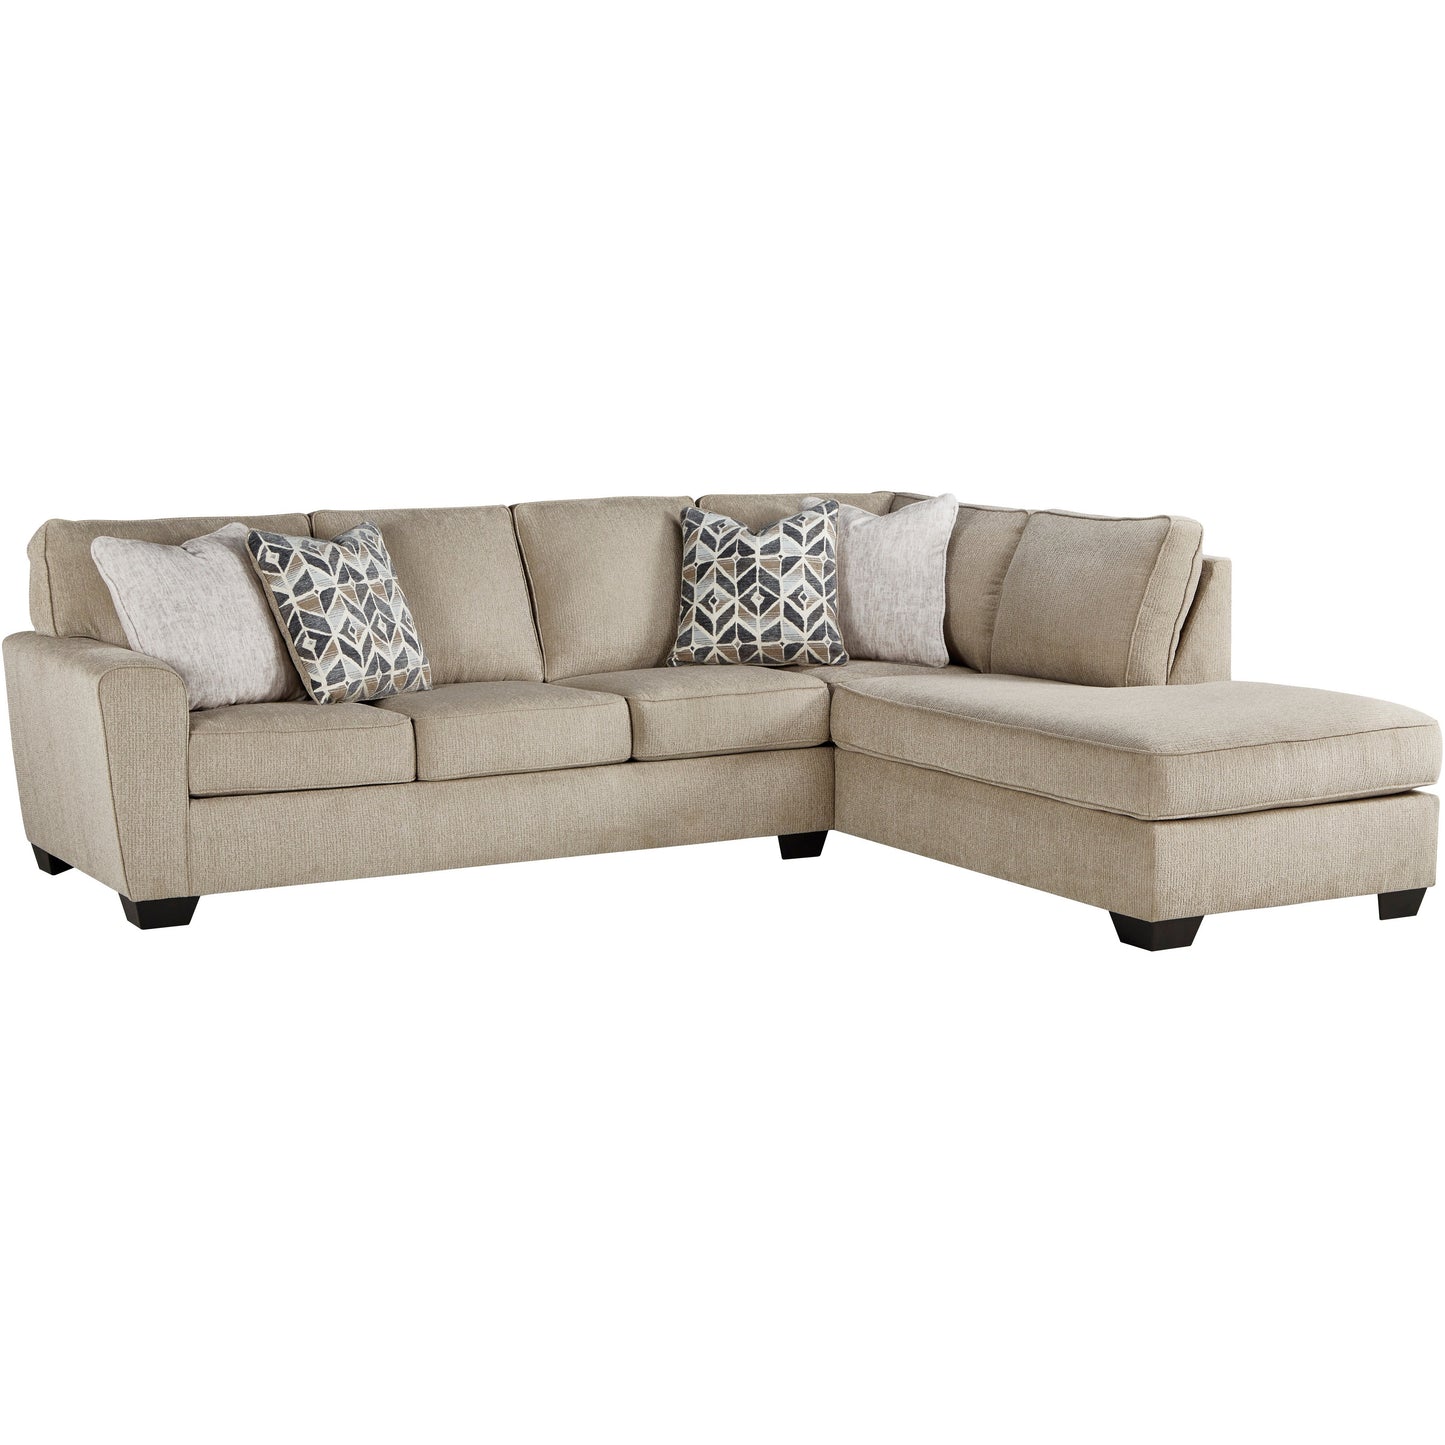 DECELLE SECTIONAL - PUTTY